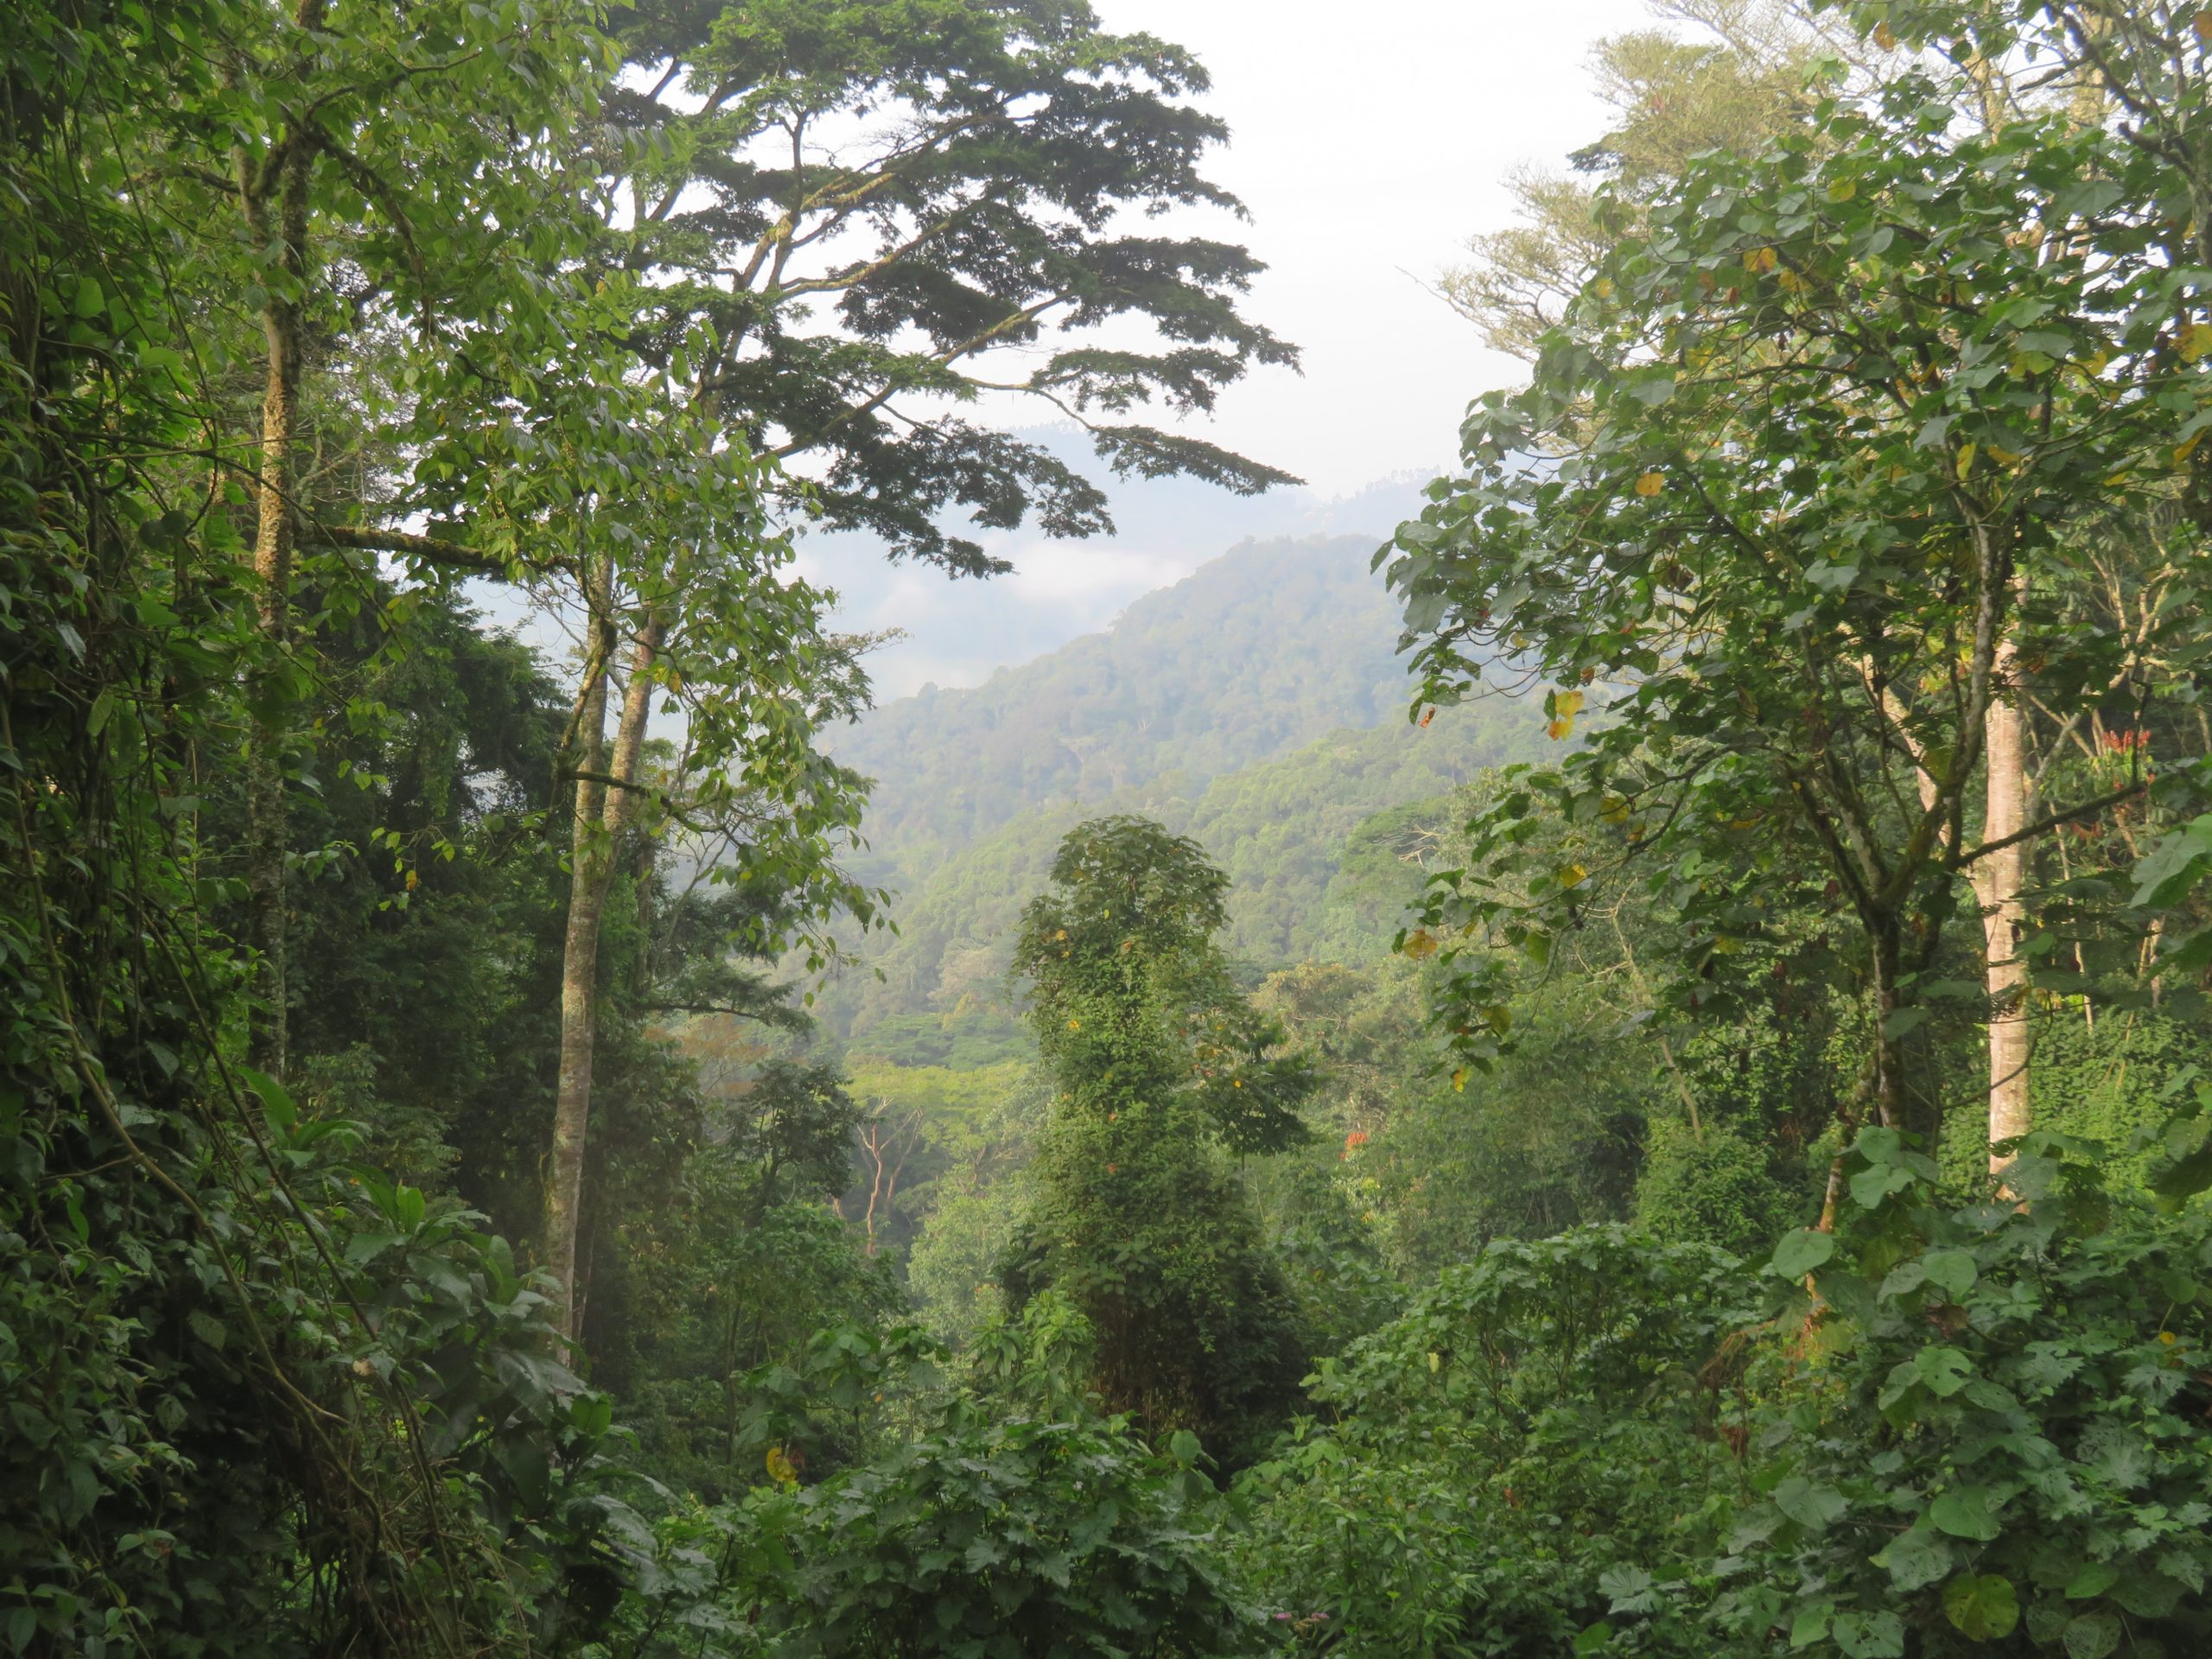 Uganda's National Parks - a view through the trees in Bwindi National Park